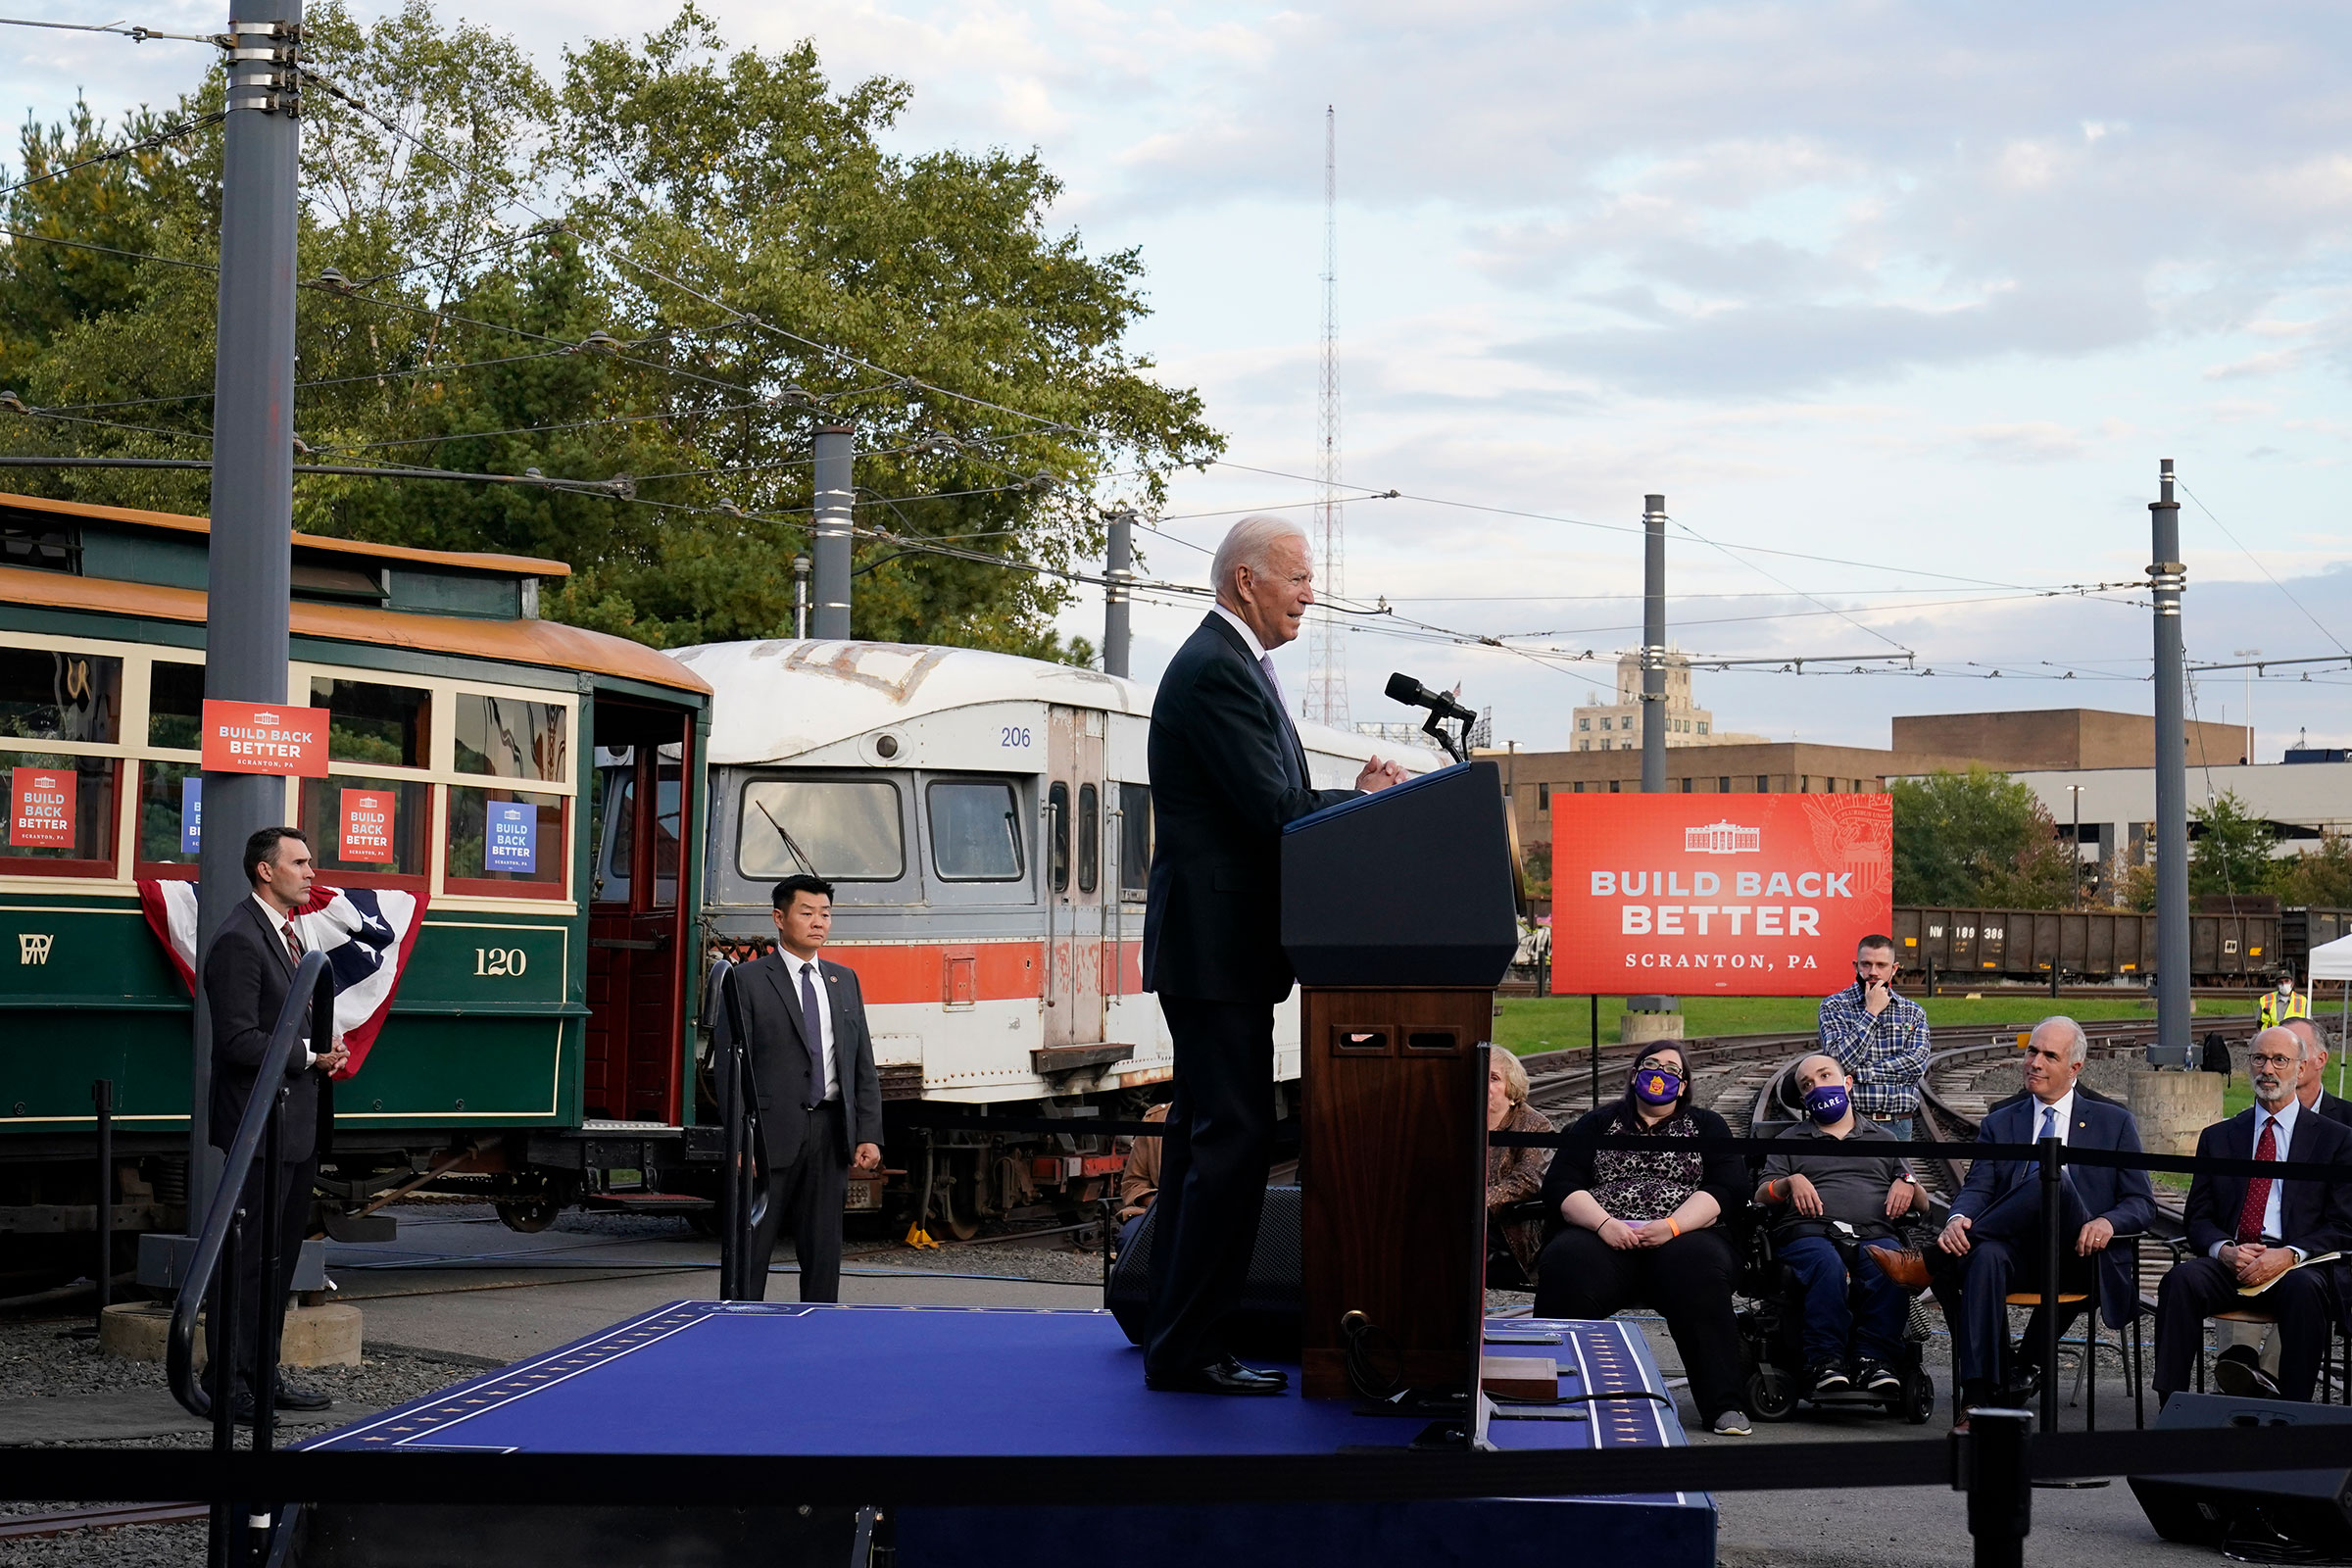 President Joe Biden speaks about his infrastructure plan and his domestic agenda during a visit to the Electric City Trolley Museum in Scranton, Pa., on Oct. 20, 2021. (Susan Walsh—AP)